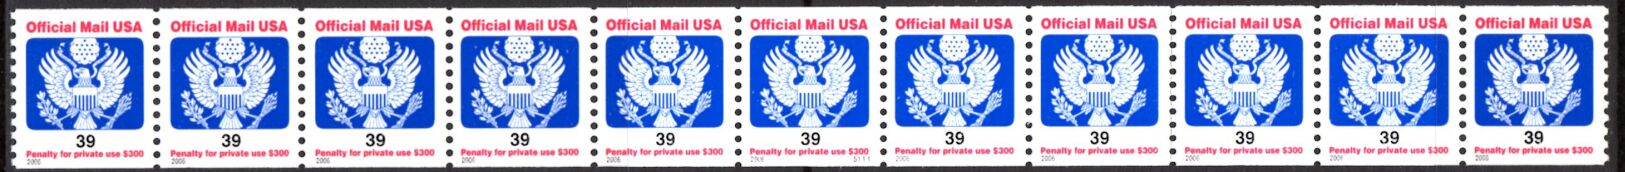 US Stamp #O159 MNH Official PS11 #S111 Coil